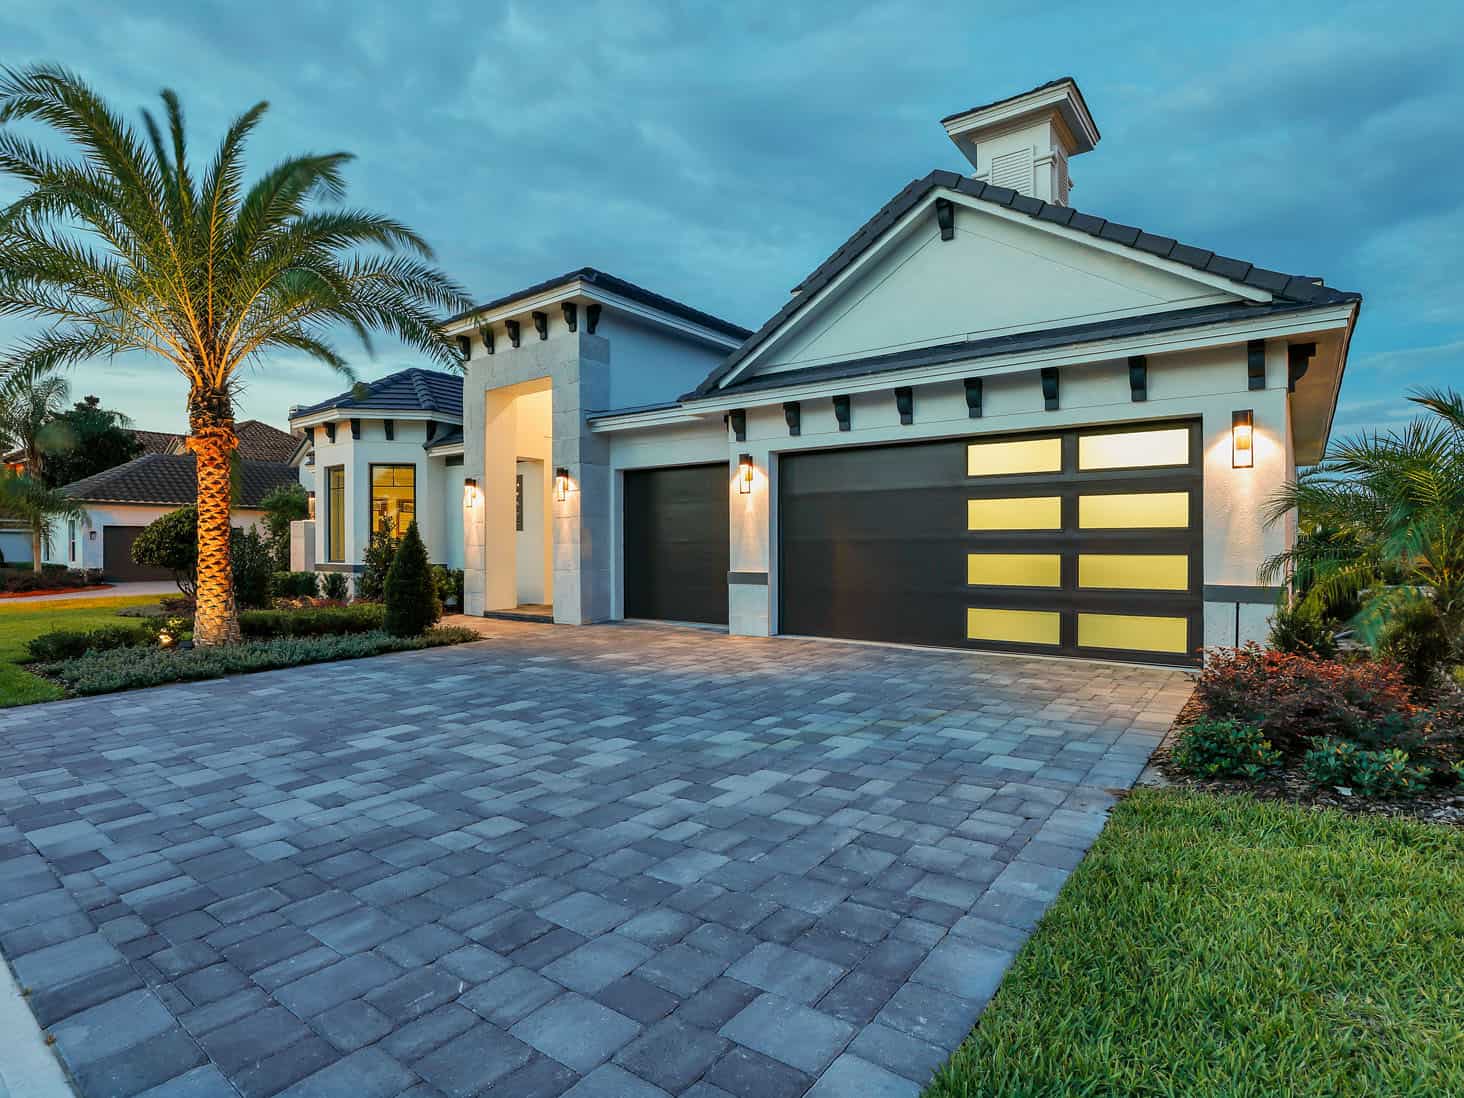 Paver driveway and our luxury model home - Providence, Florida